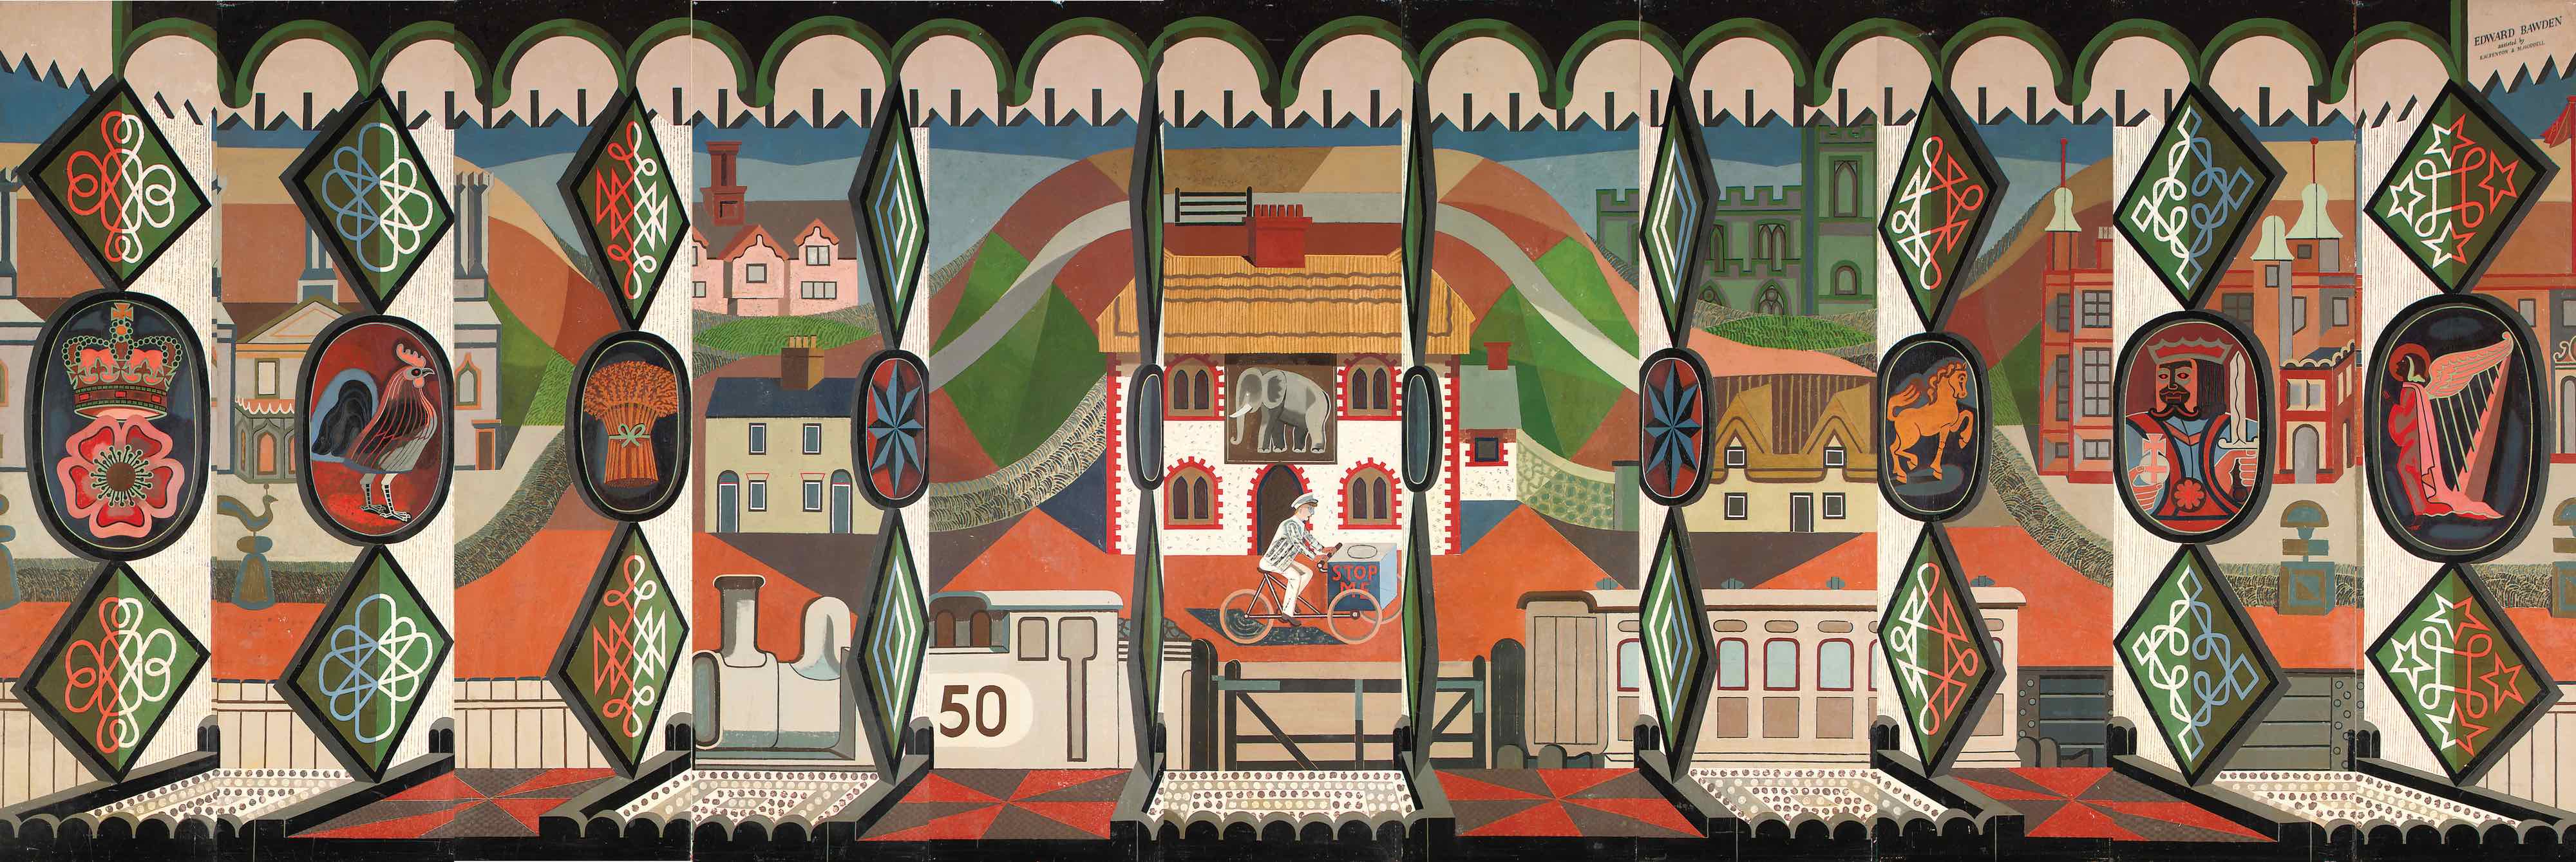 The English Pub, mural for Oronsay, by Edward. Bawden, assisted by E.W. Fenton and M. Hoddell. Â© Private collection courtesy of Jennings Fine Art and Liss Llewellyn Fine